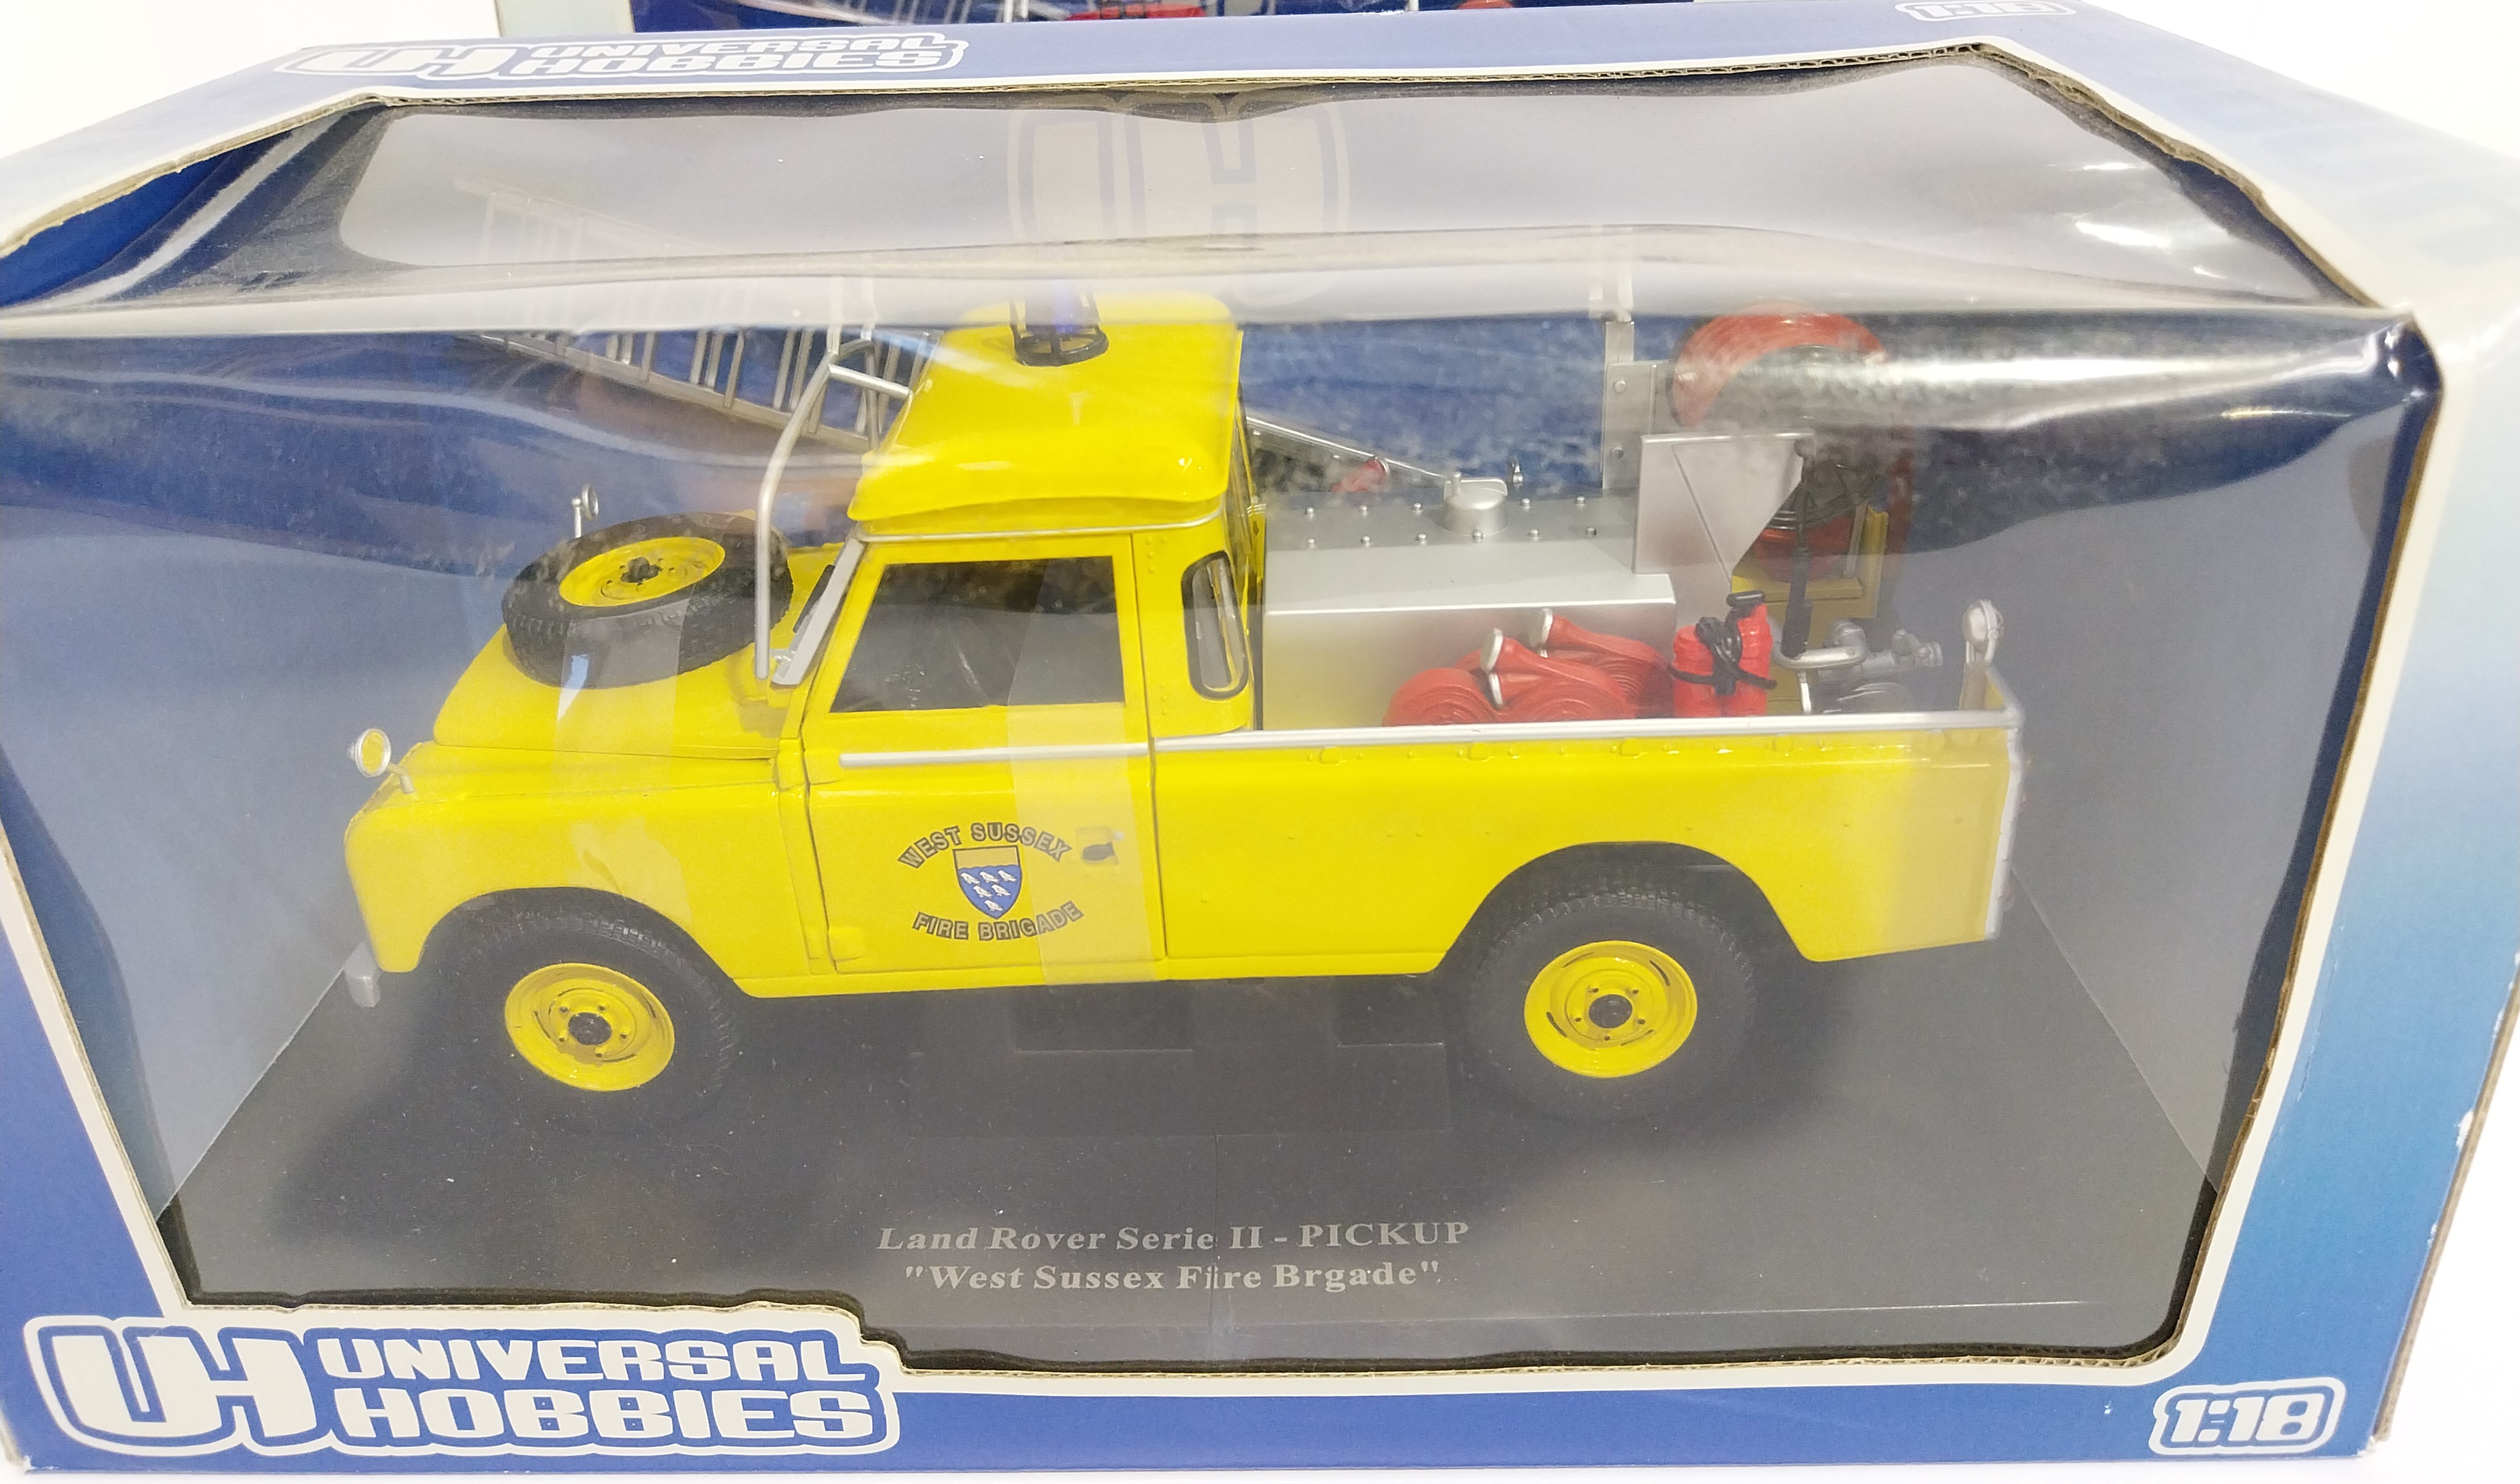 UH Universal Hobbies, a boxed pair of Landrover models - Image 2 of 3